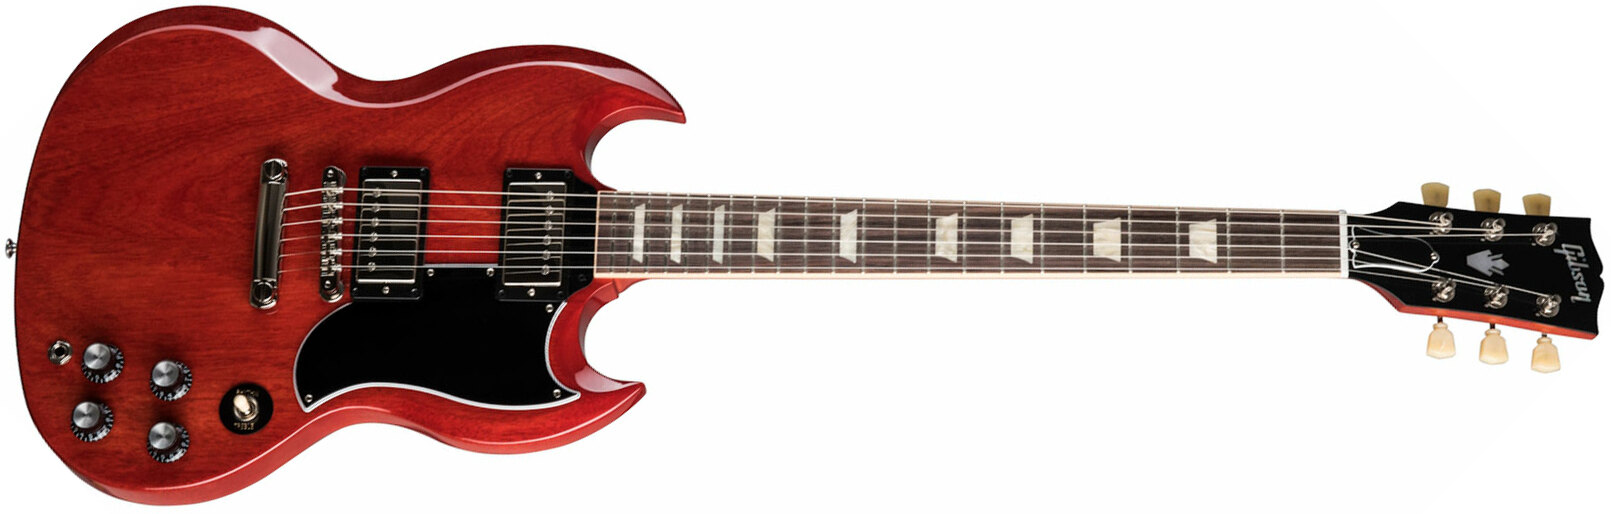 Gibson Sg Standard '61 2h Ht Rw - Vintage Cherry - Retro rock electric guitar - Main picture